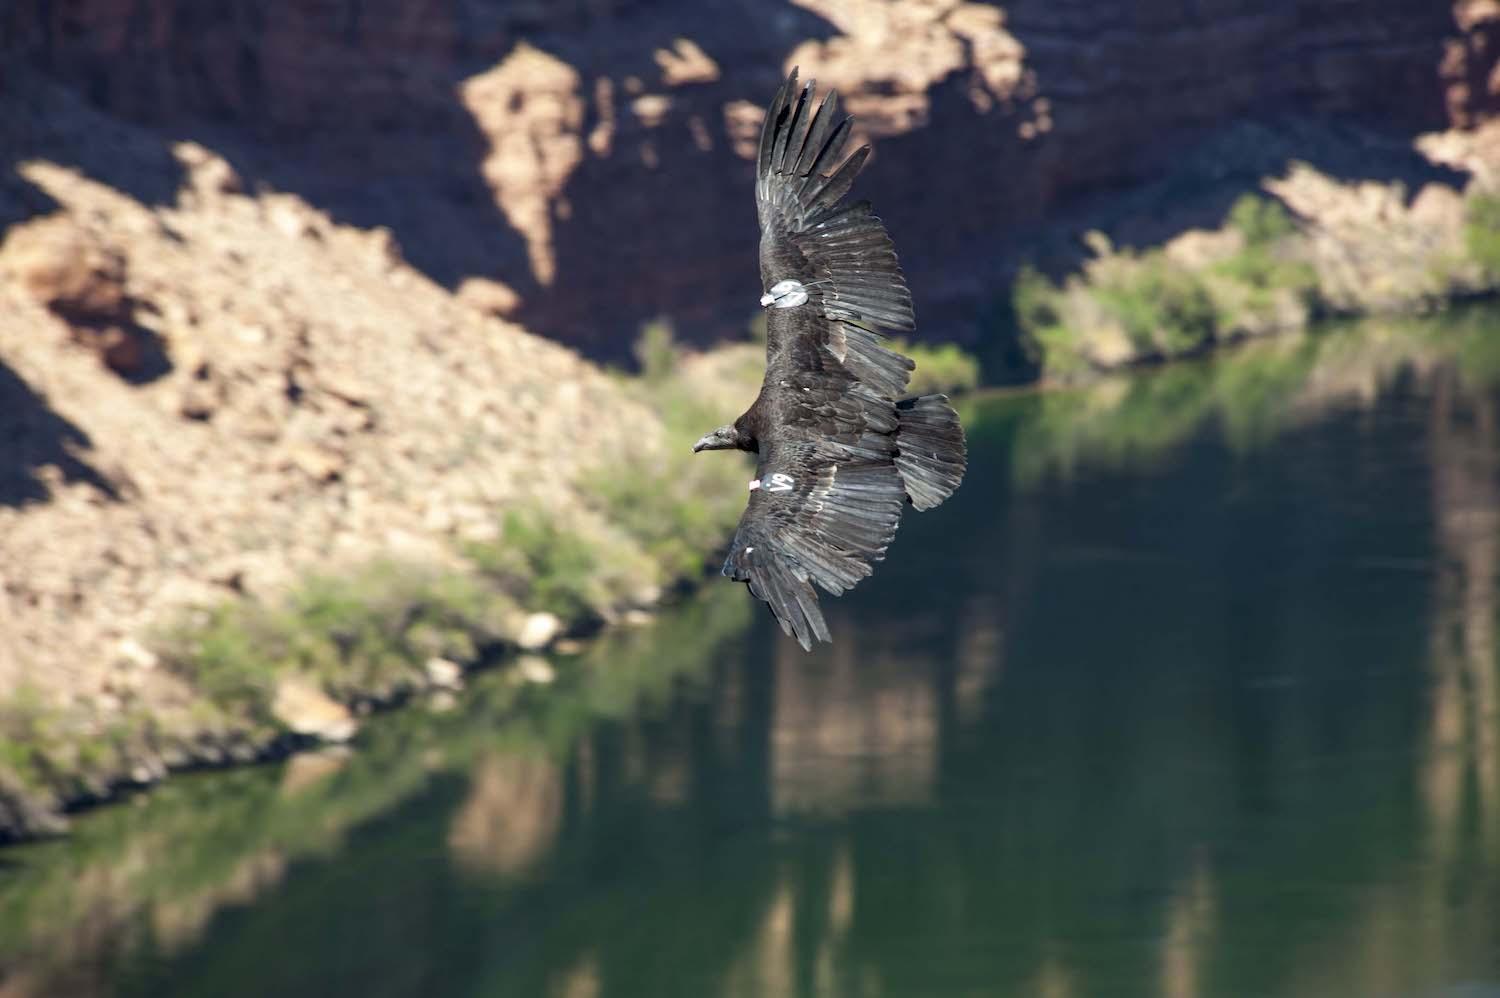 A release of captive-born California condors in late September could bring more aerial displays for motorists who stop at the Navajo Bridge in Glen Canyon National Recreation Area/Patrick Cone